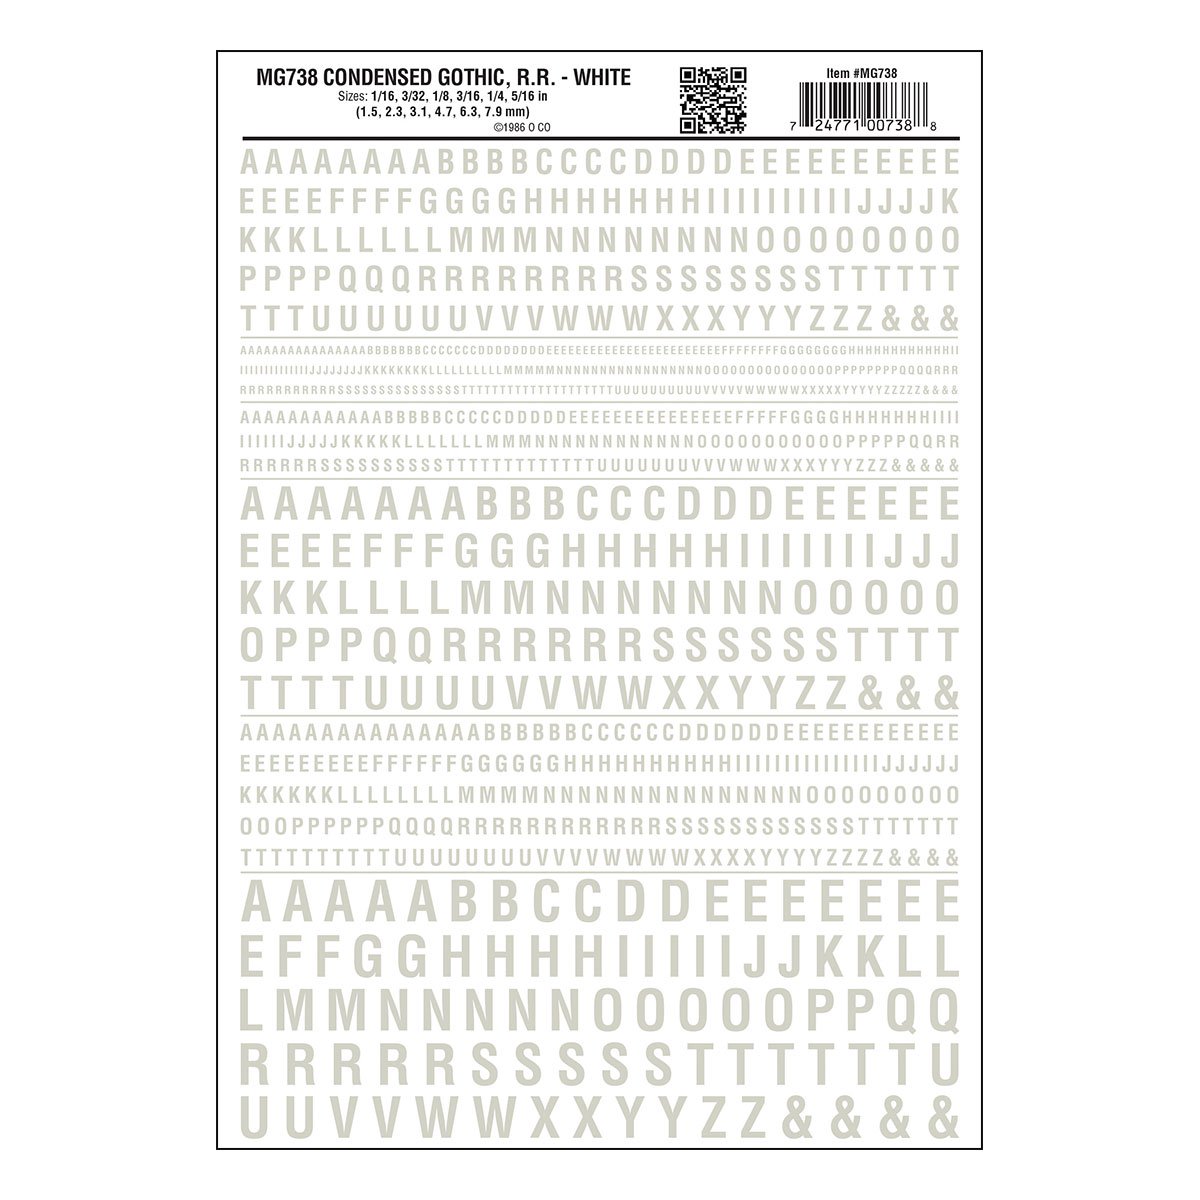 MG738 Condensed Gothic R.R. White Decals